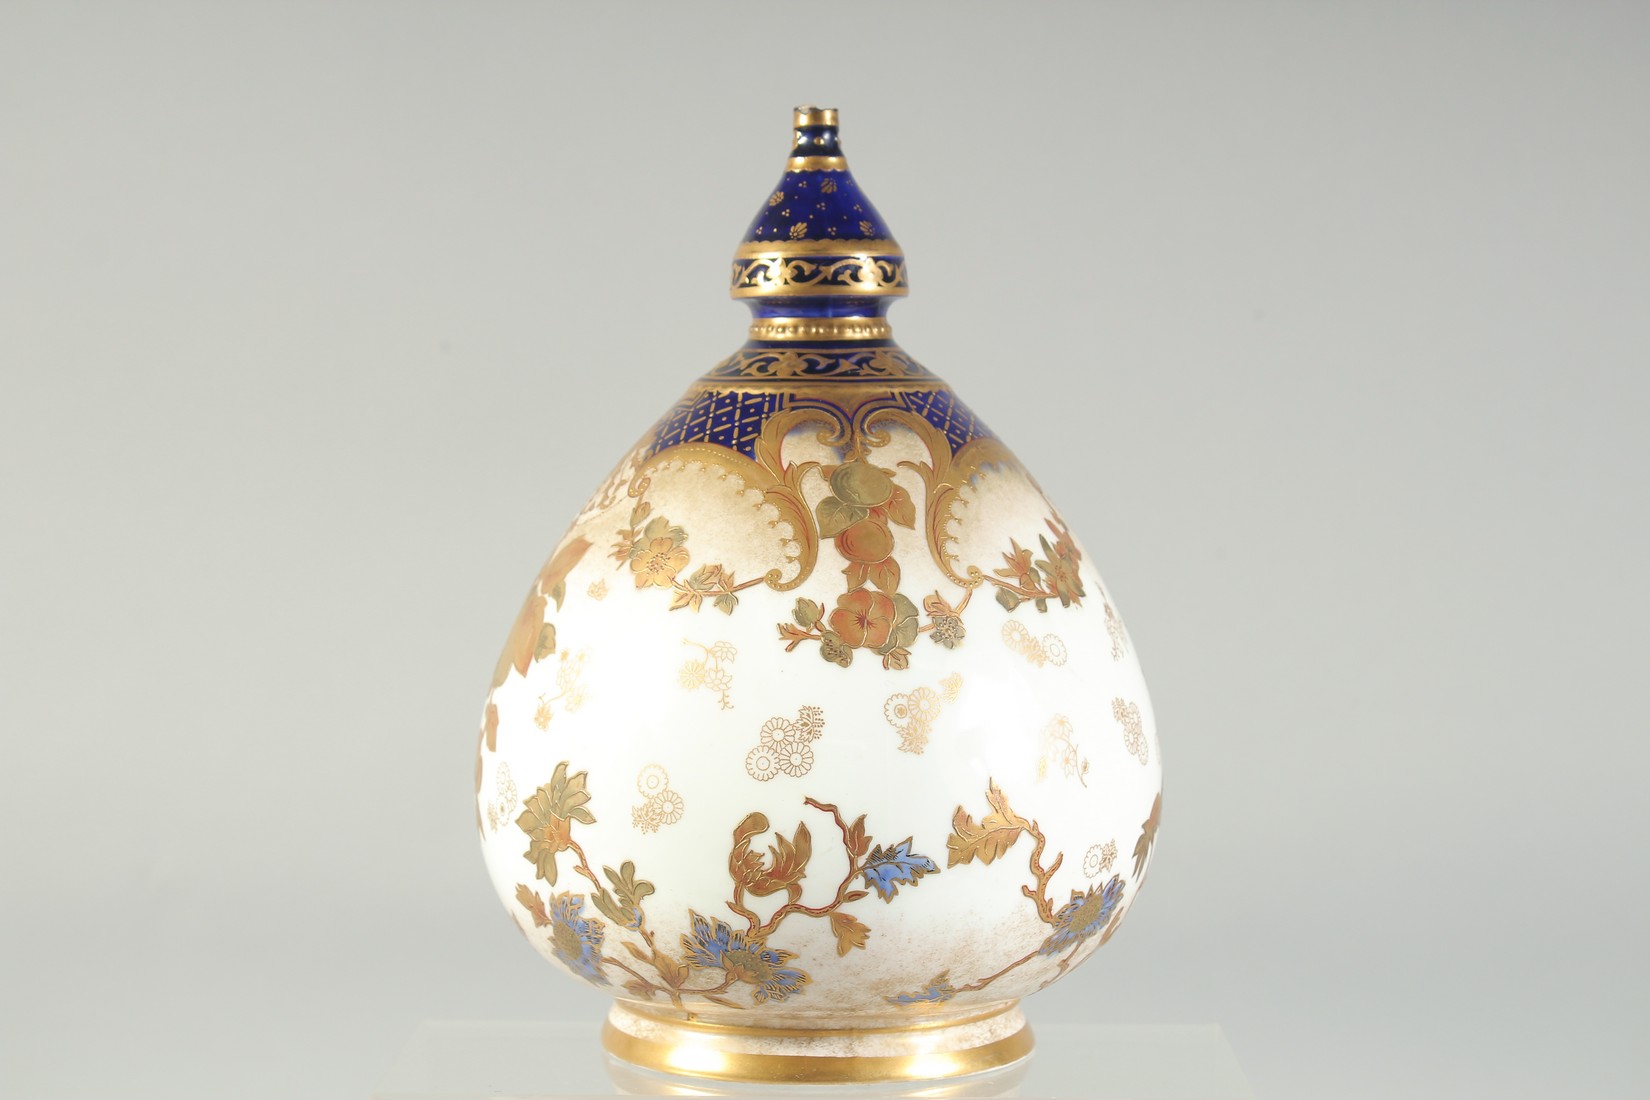 AN OTTOMAN MARKET ROYAL DERBY PORCELAIN VESSEL, with gilded foliate decoration, 22.5cm high. - Image 2 of 7